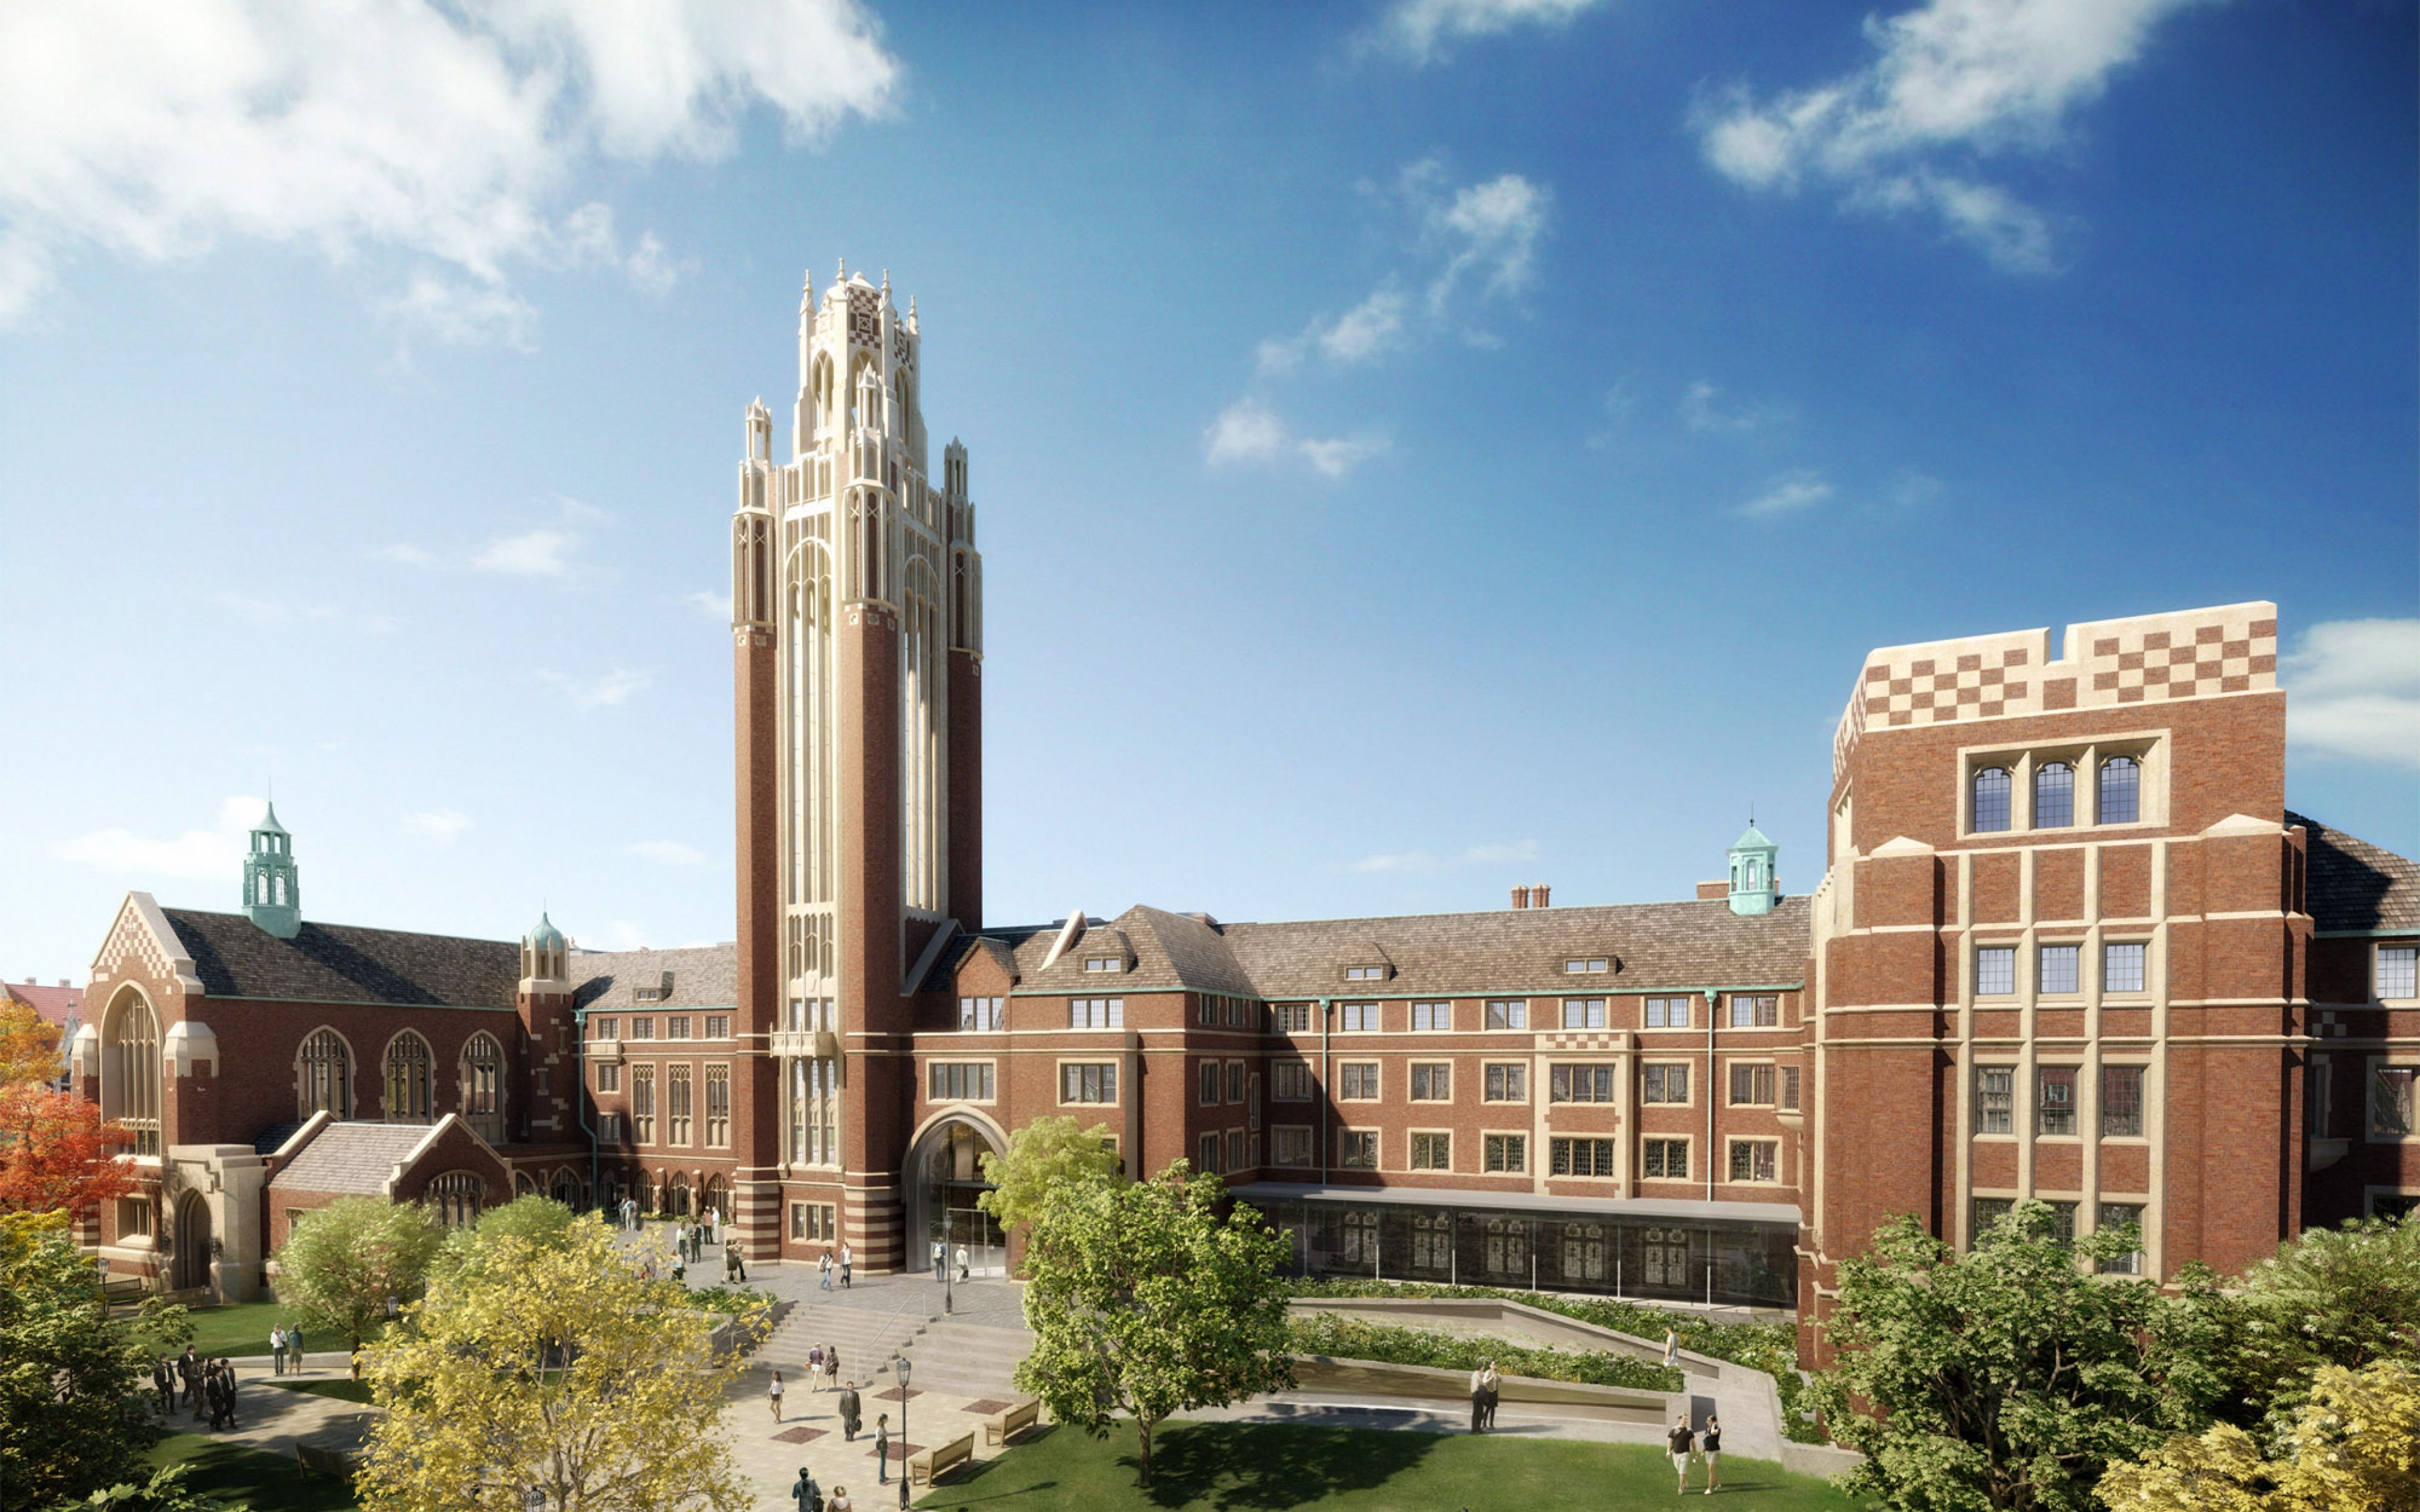 Download Wallpaper 3840x2400 University of chicago, Chicago